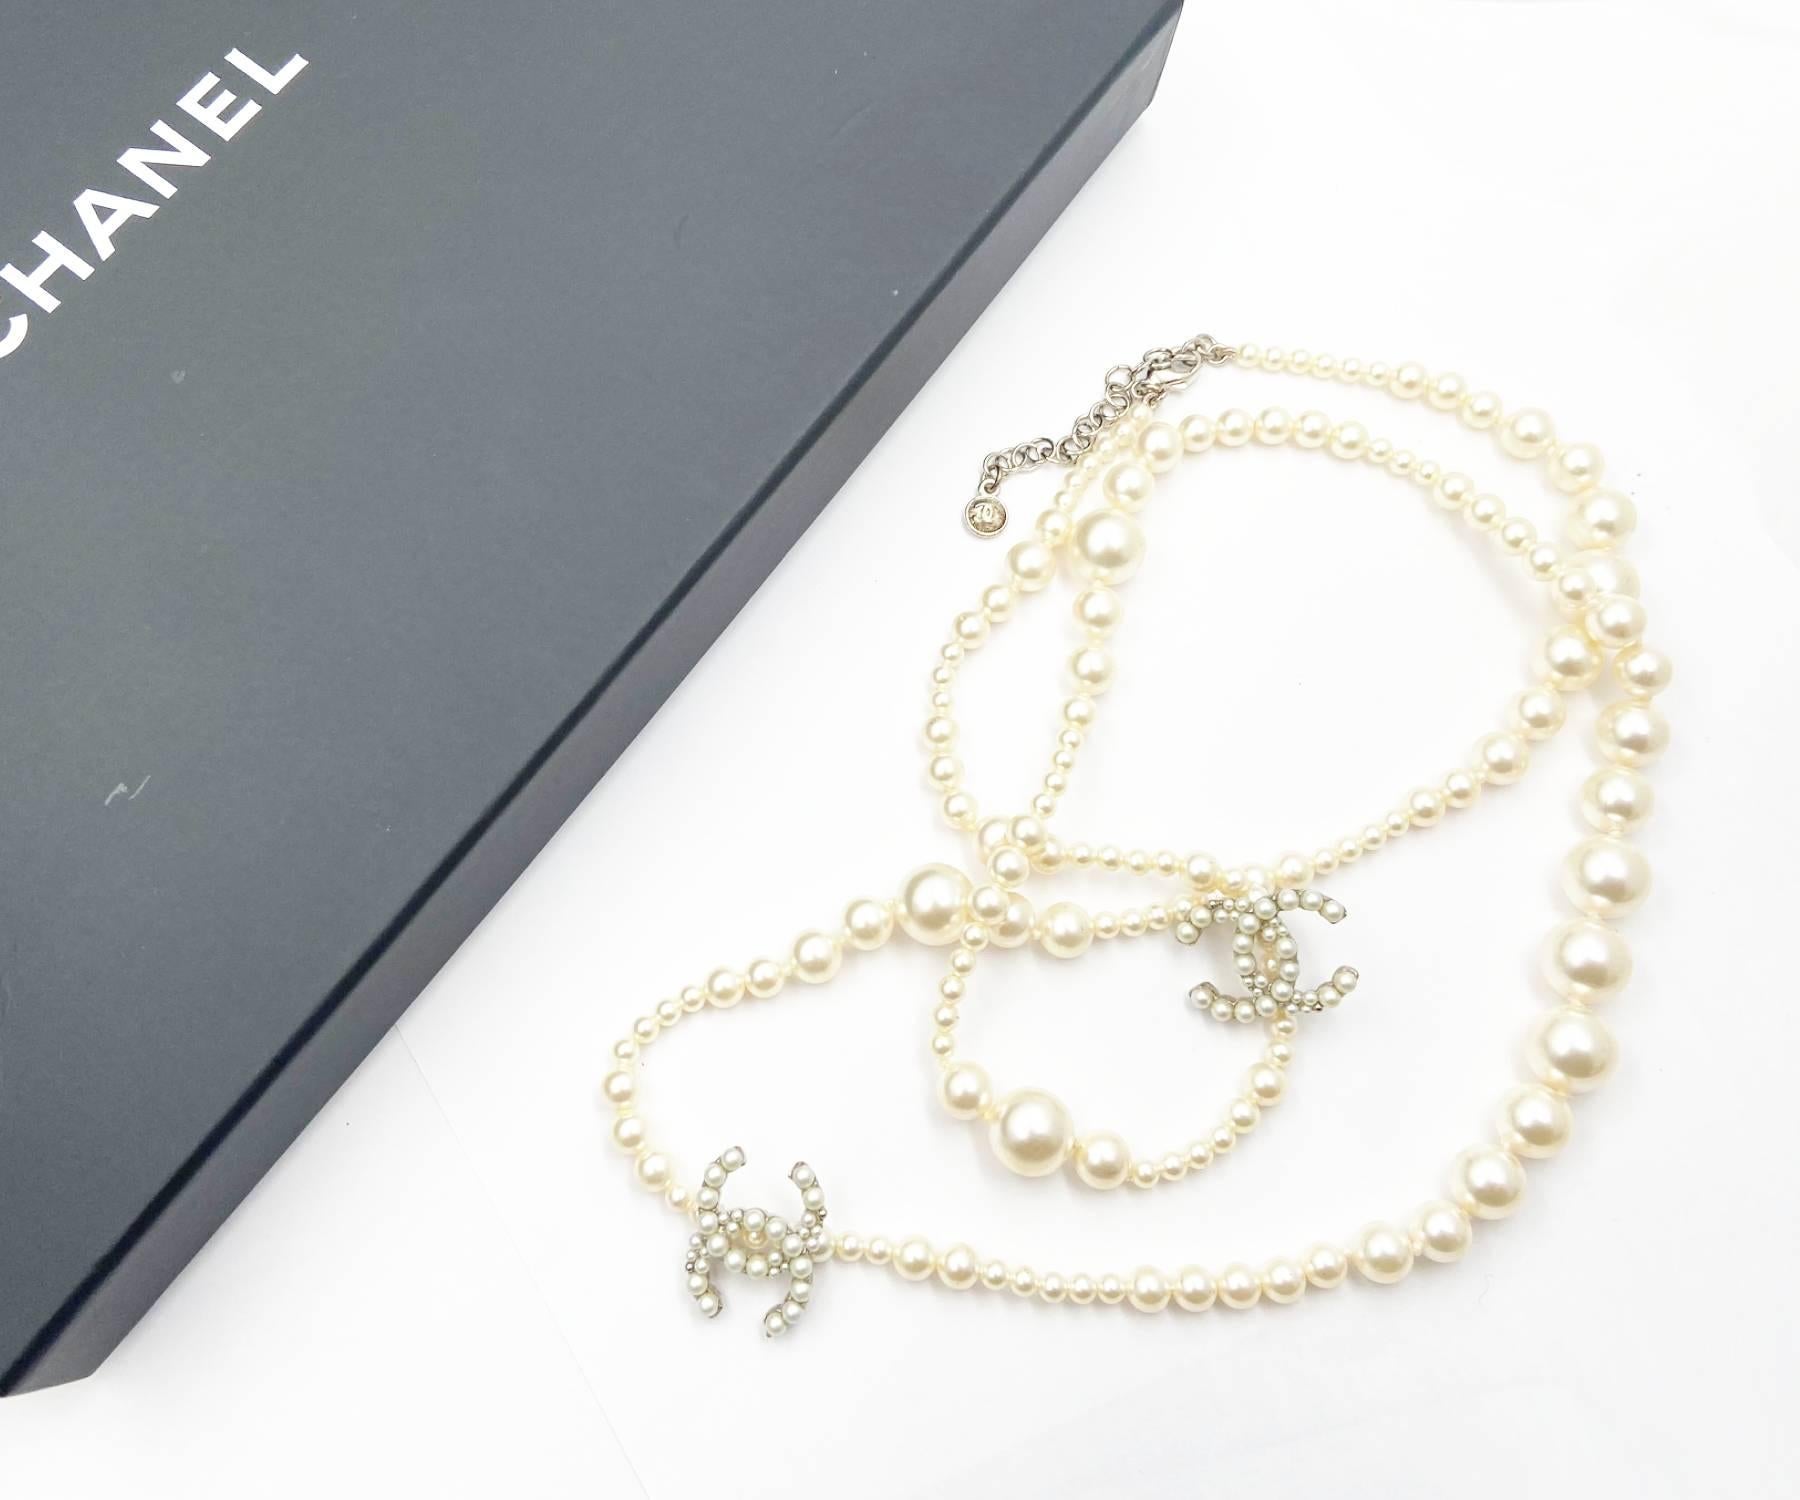 Chanel Silver CC Bubble Pearl Pearl Necklace

*Marked 14
*Made in France
*Comes with the original box and pouch

-Approximately 36″ long
-The pendants are approximately 0.75″ x 1″.
-Very classic and pretty
-It is in a very good condition. There are